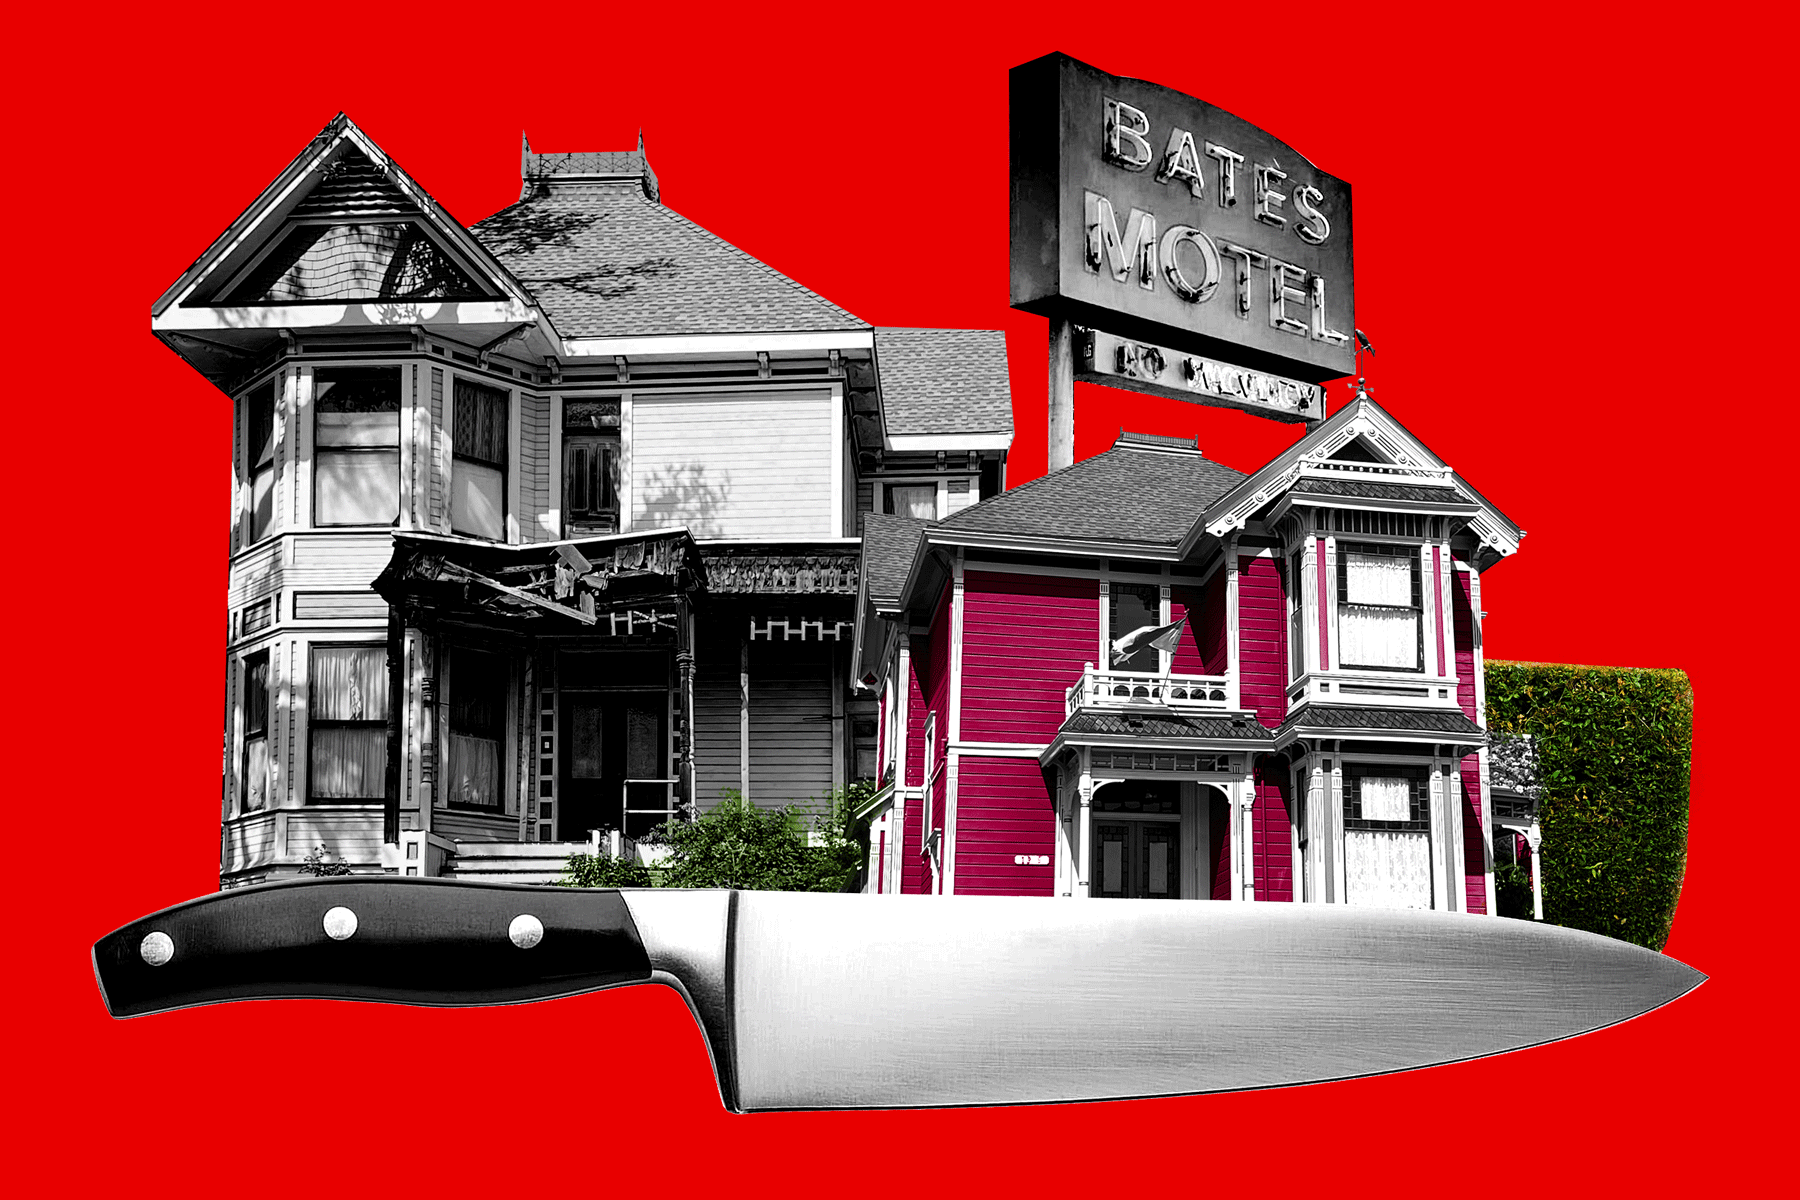 A photo collage of houses from the list with a blinking "Bates Motel" sign and a large knife.